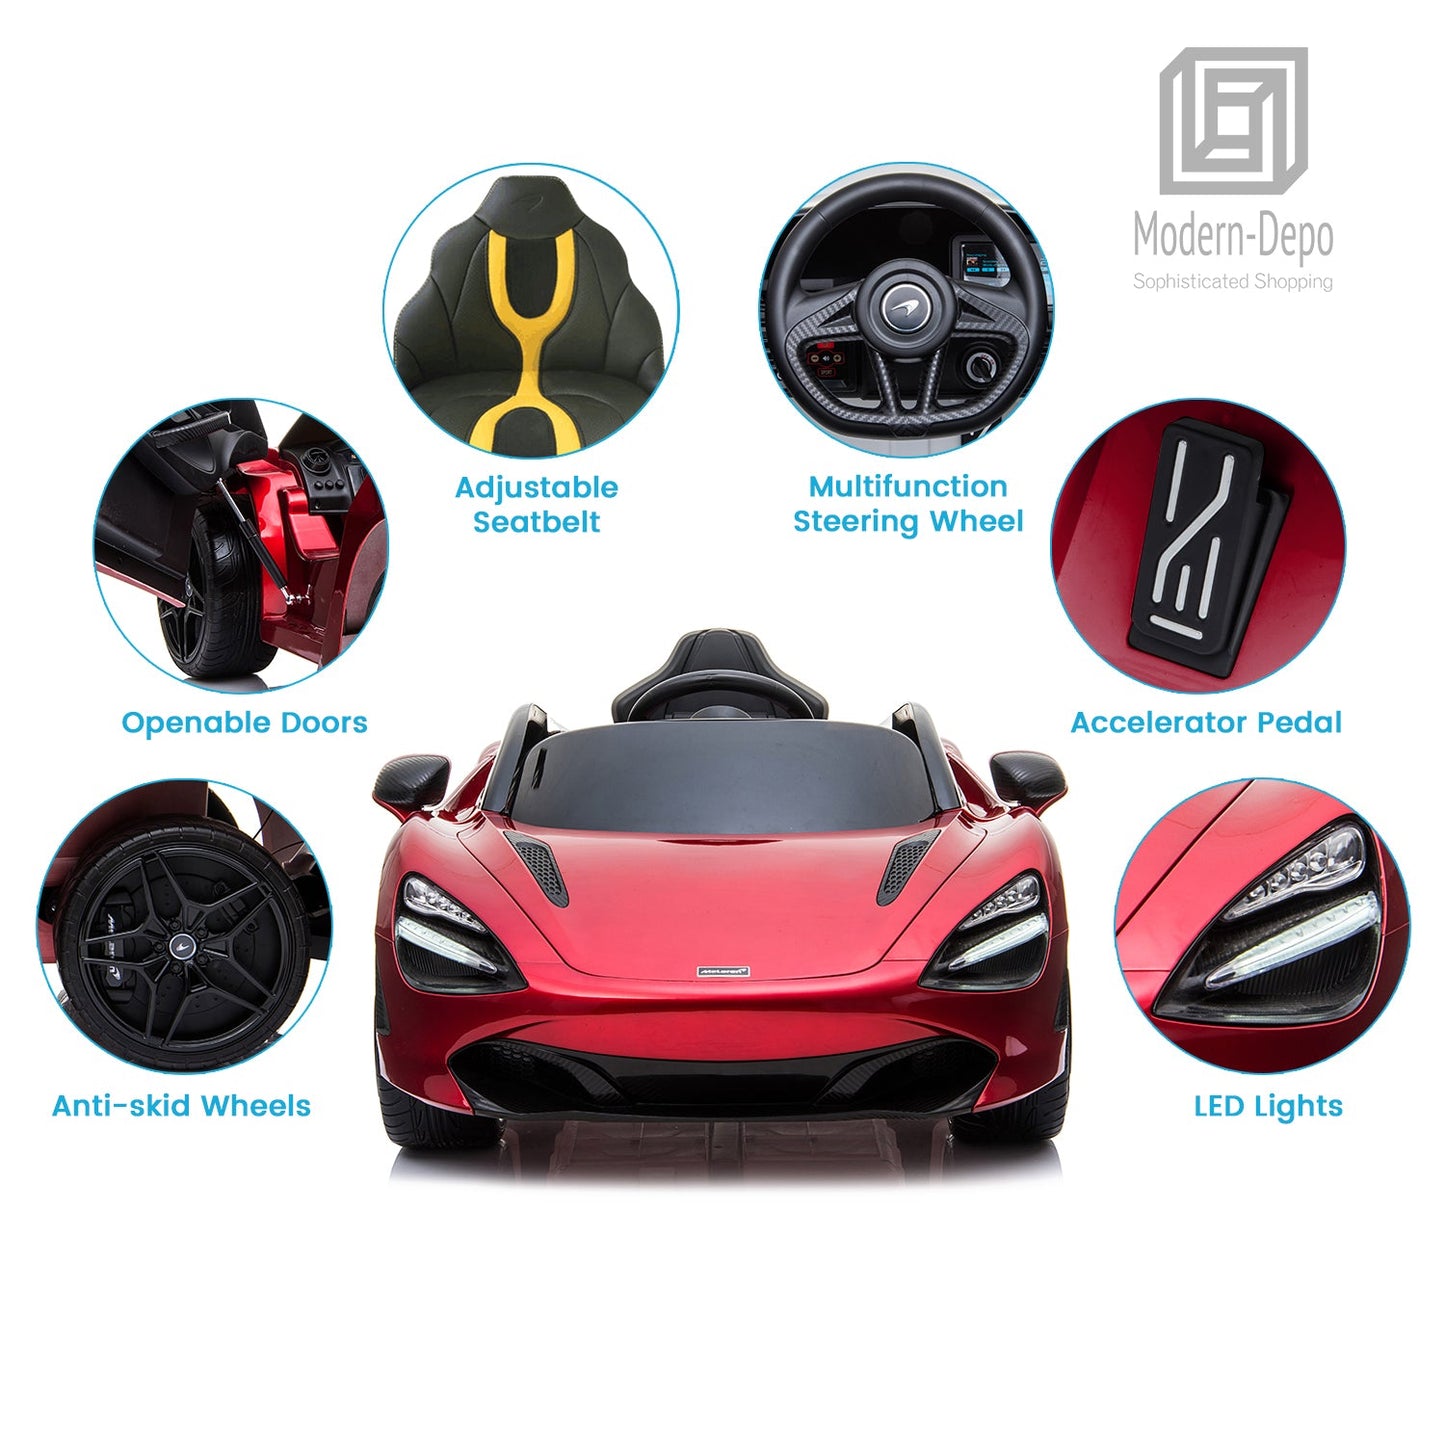 Red MCLAREN 720S Spider electric ride on car with openable doors, adjustable seatbelt, anti-skid wheels, steering wheel features, accelerator pedal and LED lights for a safe and exhilarating play experience. Also includes parental control for additional safety.